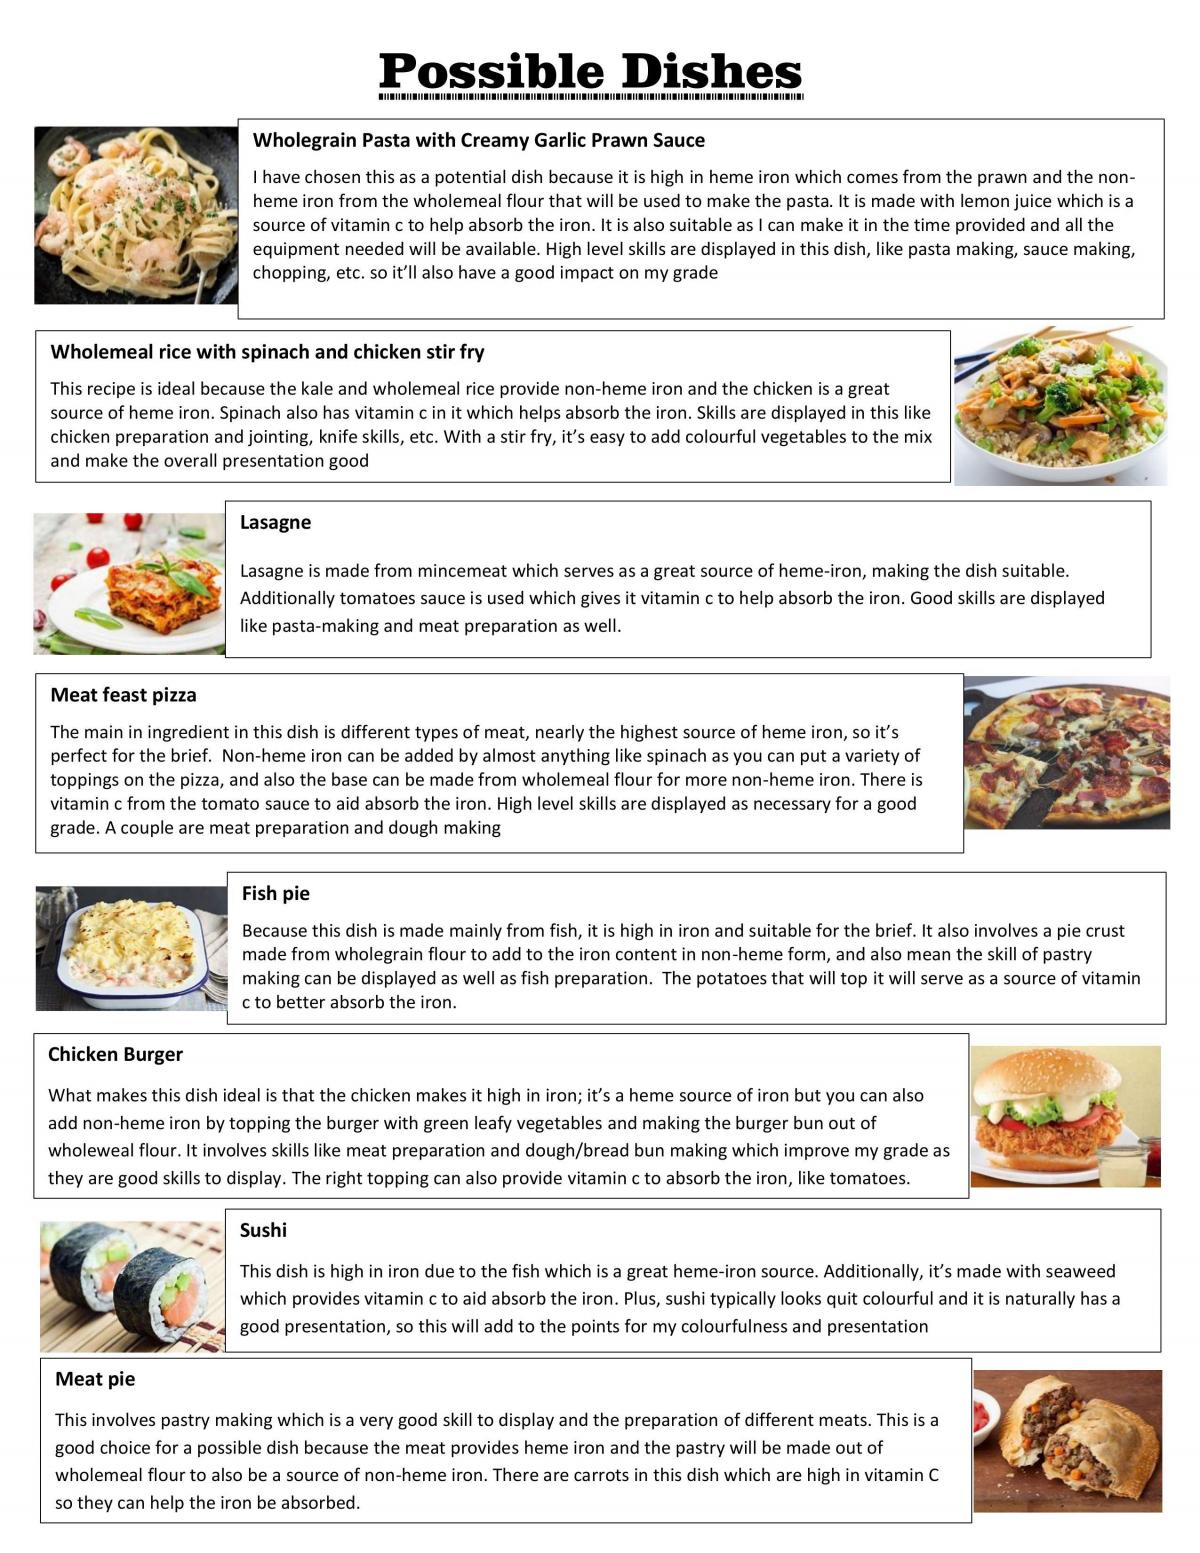 gcse food and nutrition coursework examples aqa